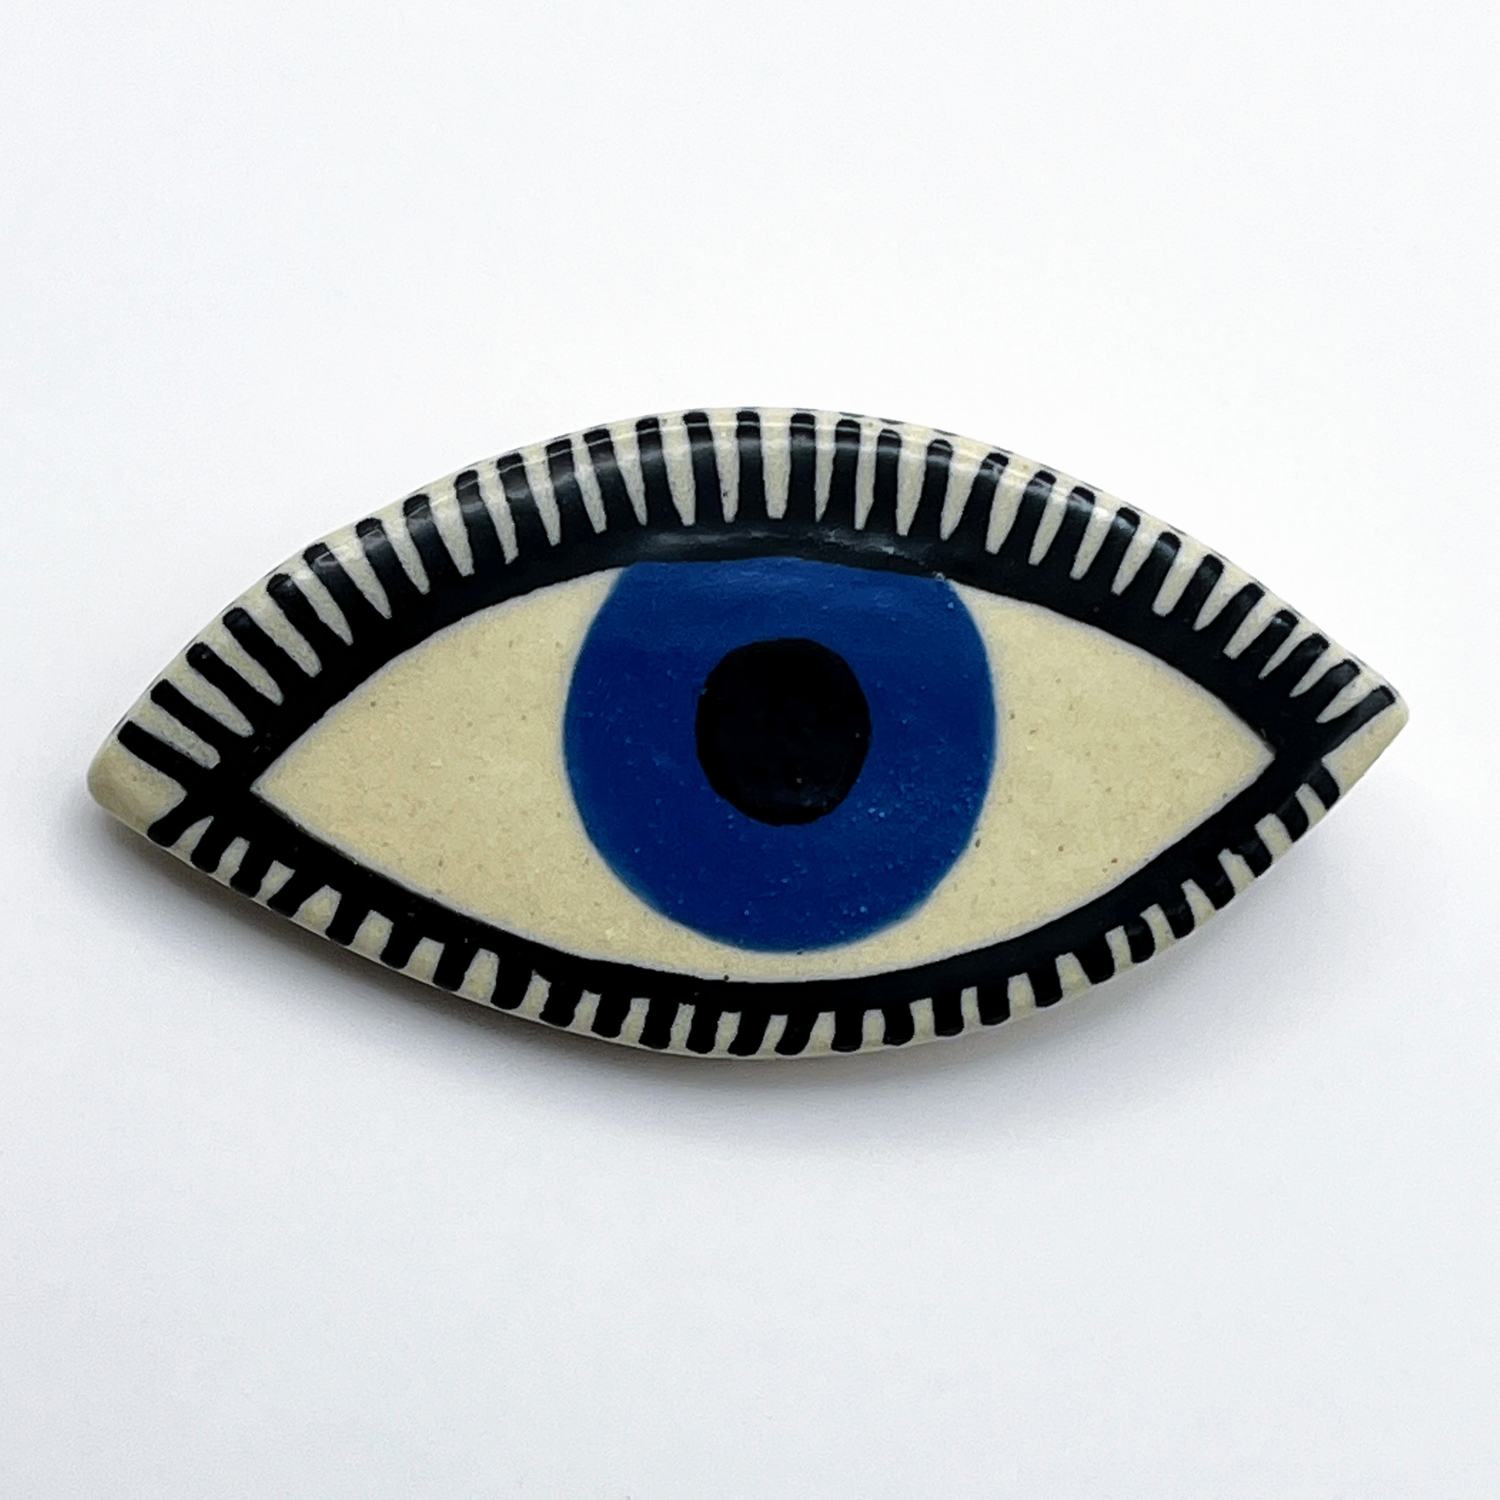 Here and Here: Blue Eye Brooch with Fine Line Lashes Product Image 1 of 2